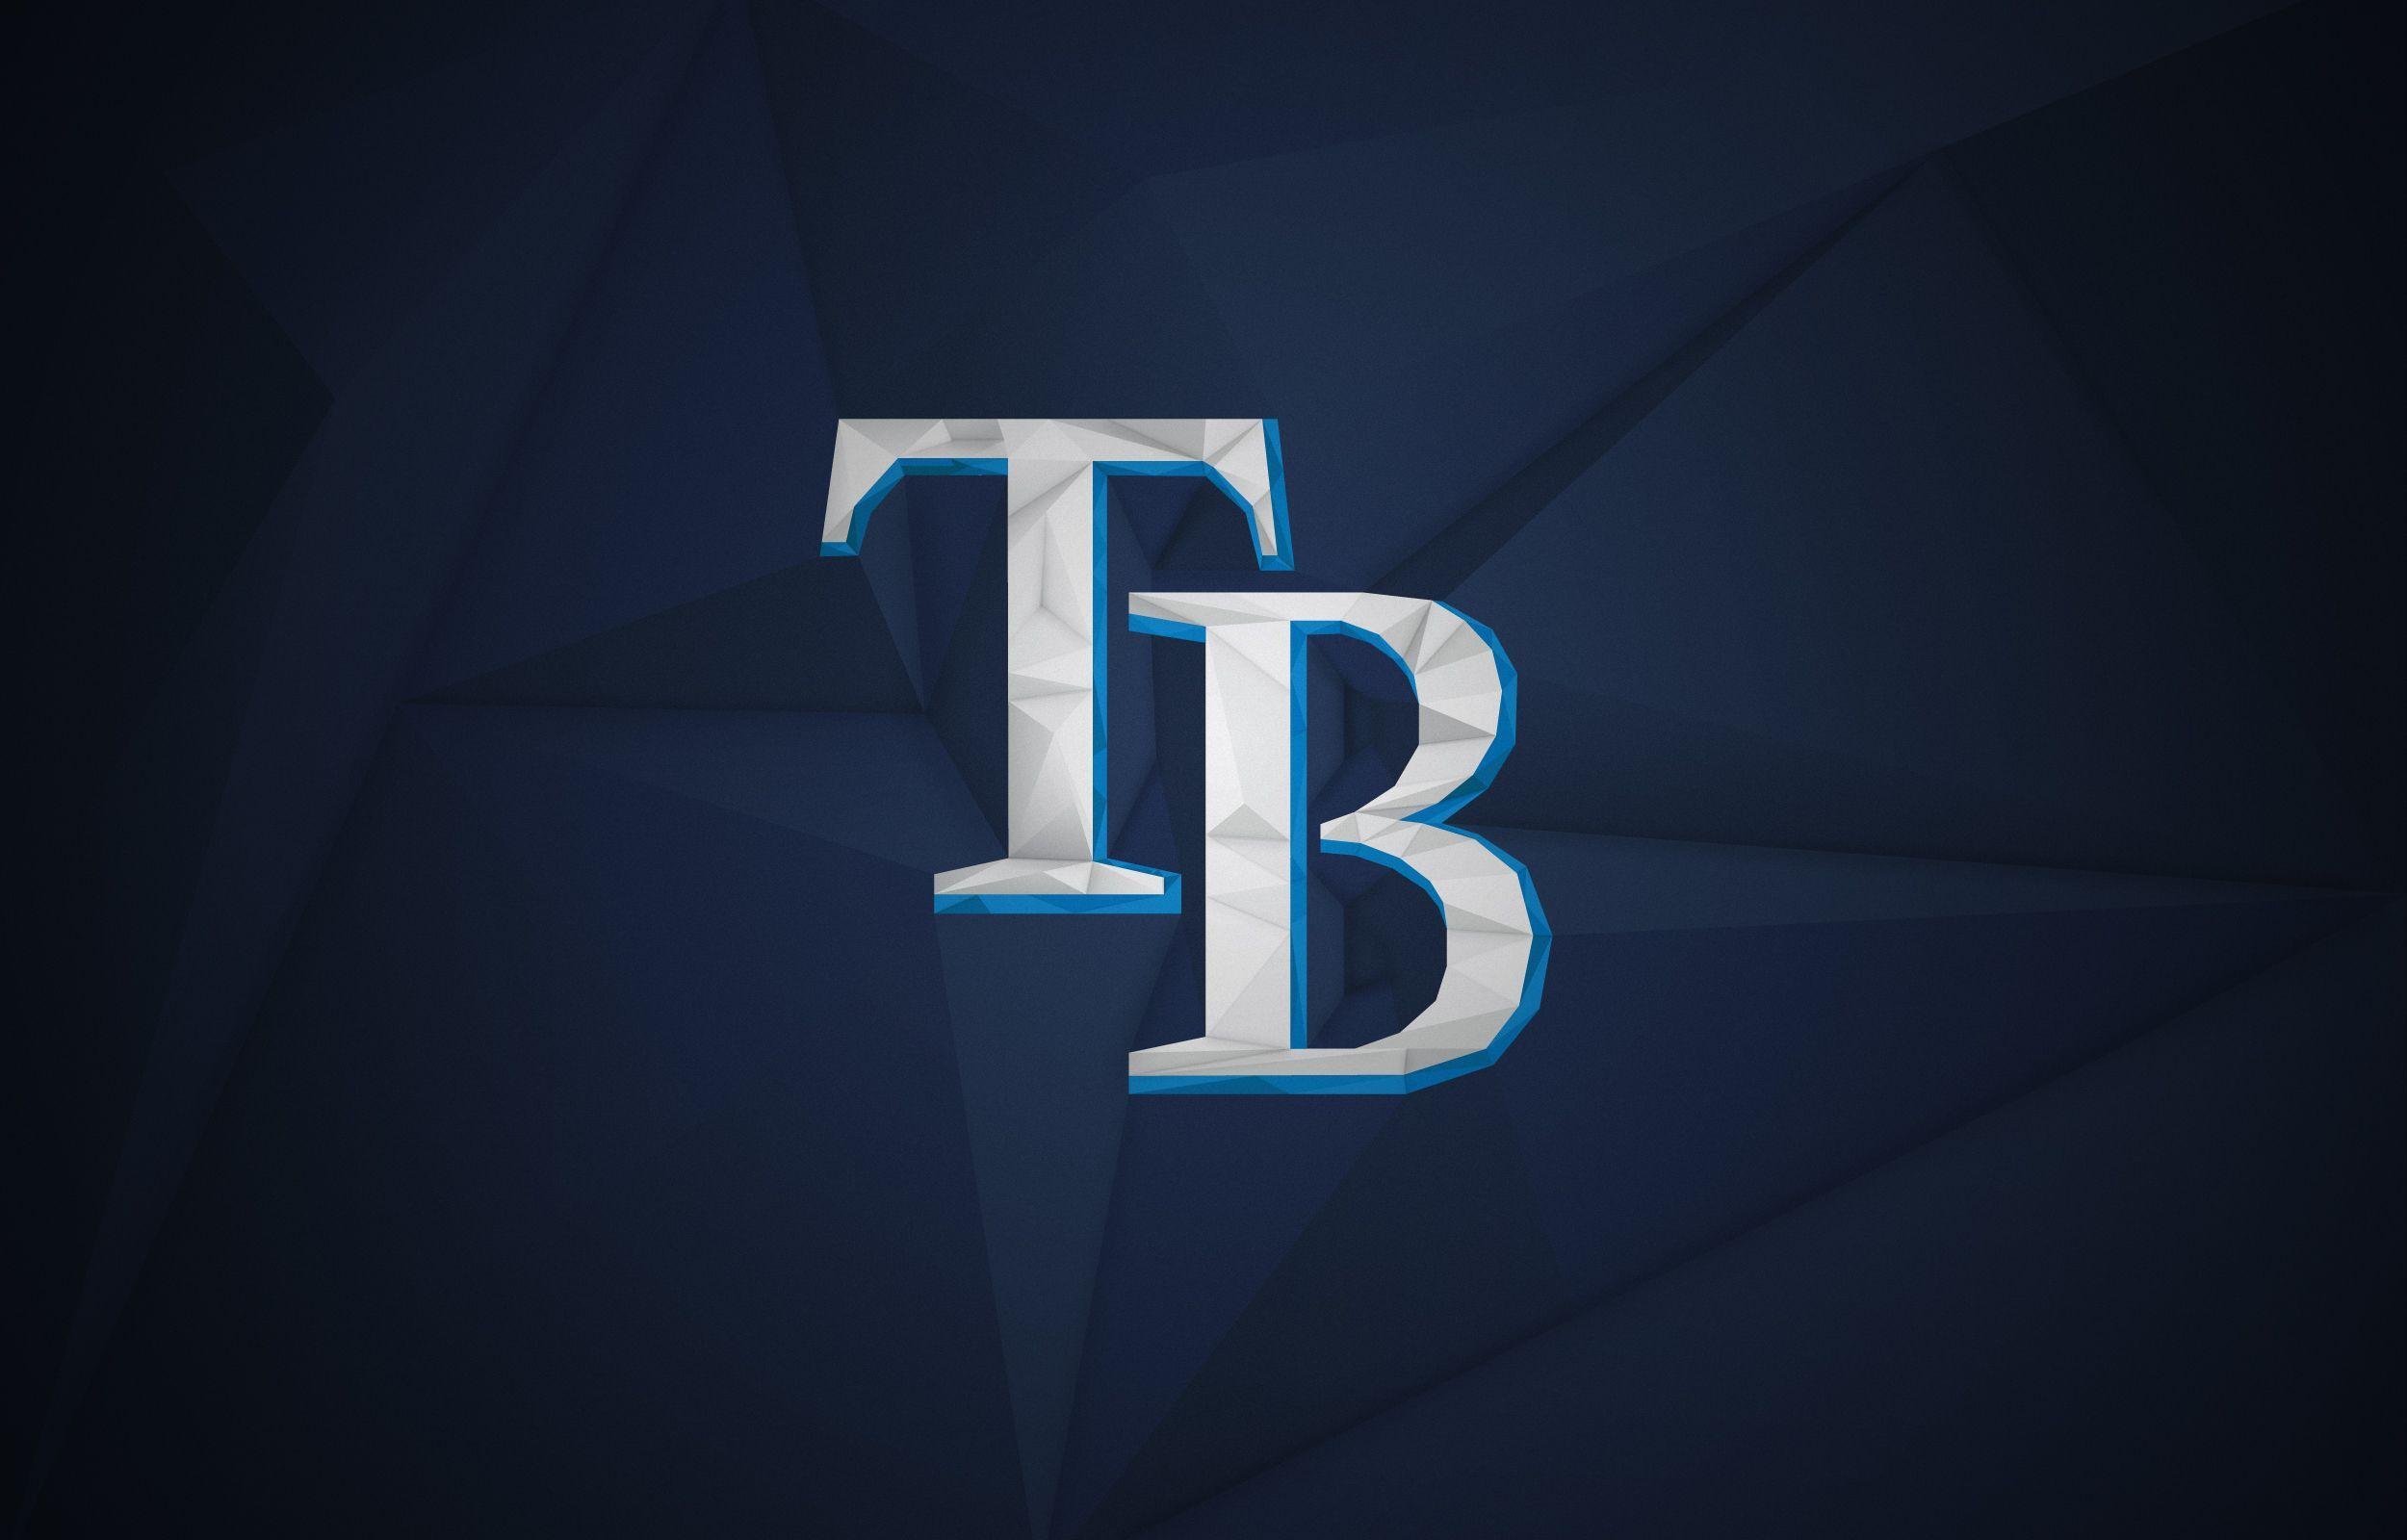 Tampa Bay Rays Wallpapers Image Photos Pictures Backgrounds